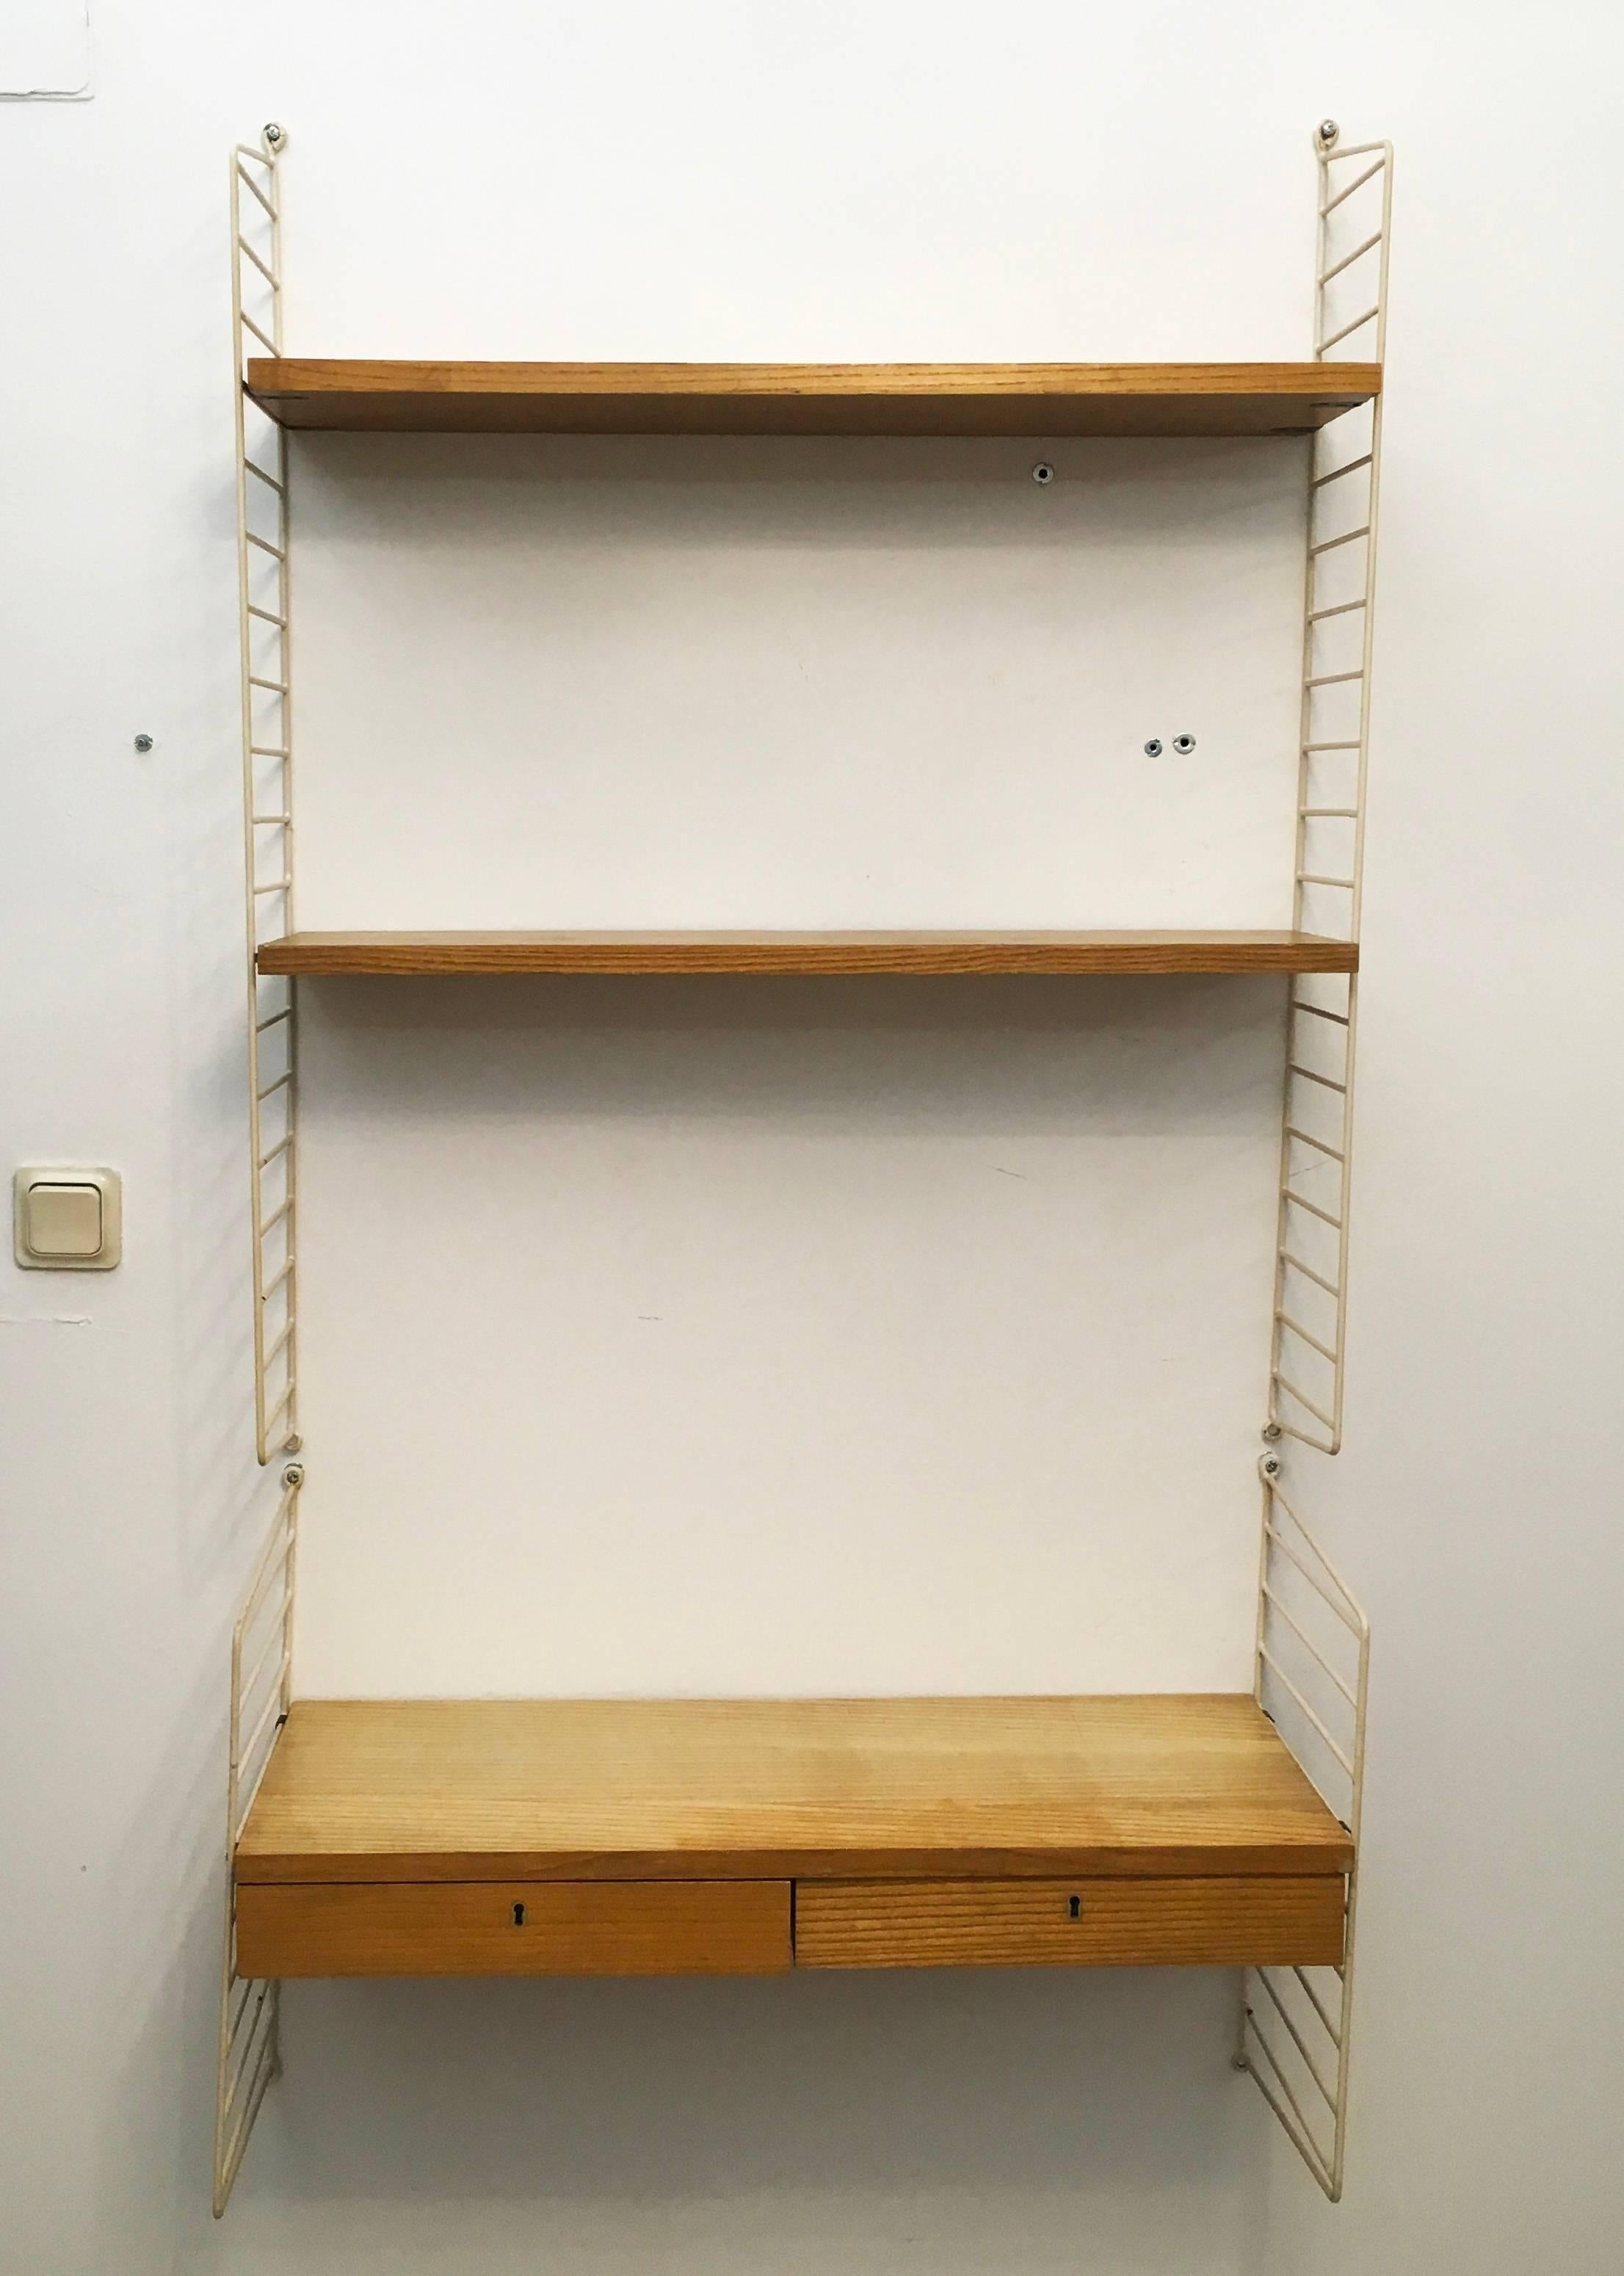 String regal wall unit designed by Nils and Kajsa Strinning in 1949. This one was made in the 1960s in Sweden.
A very good vintage condition, slight traces of use due to the age, nice patina.
Measures: Height 150 cm and width 80 cm.
Two ladders